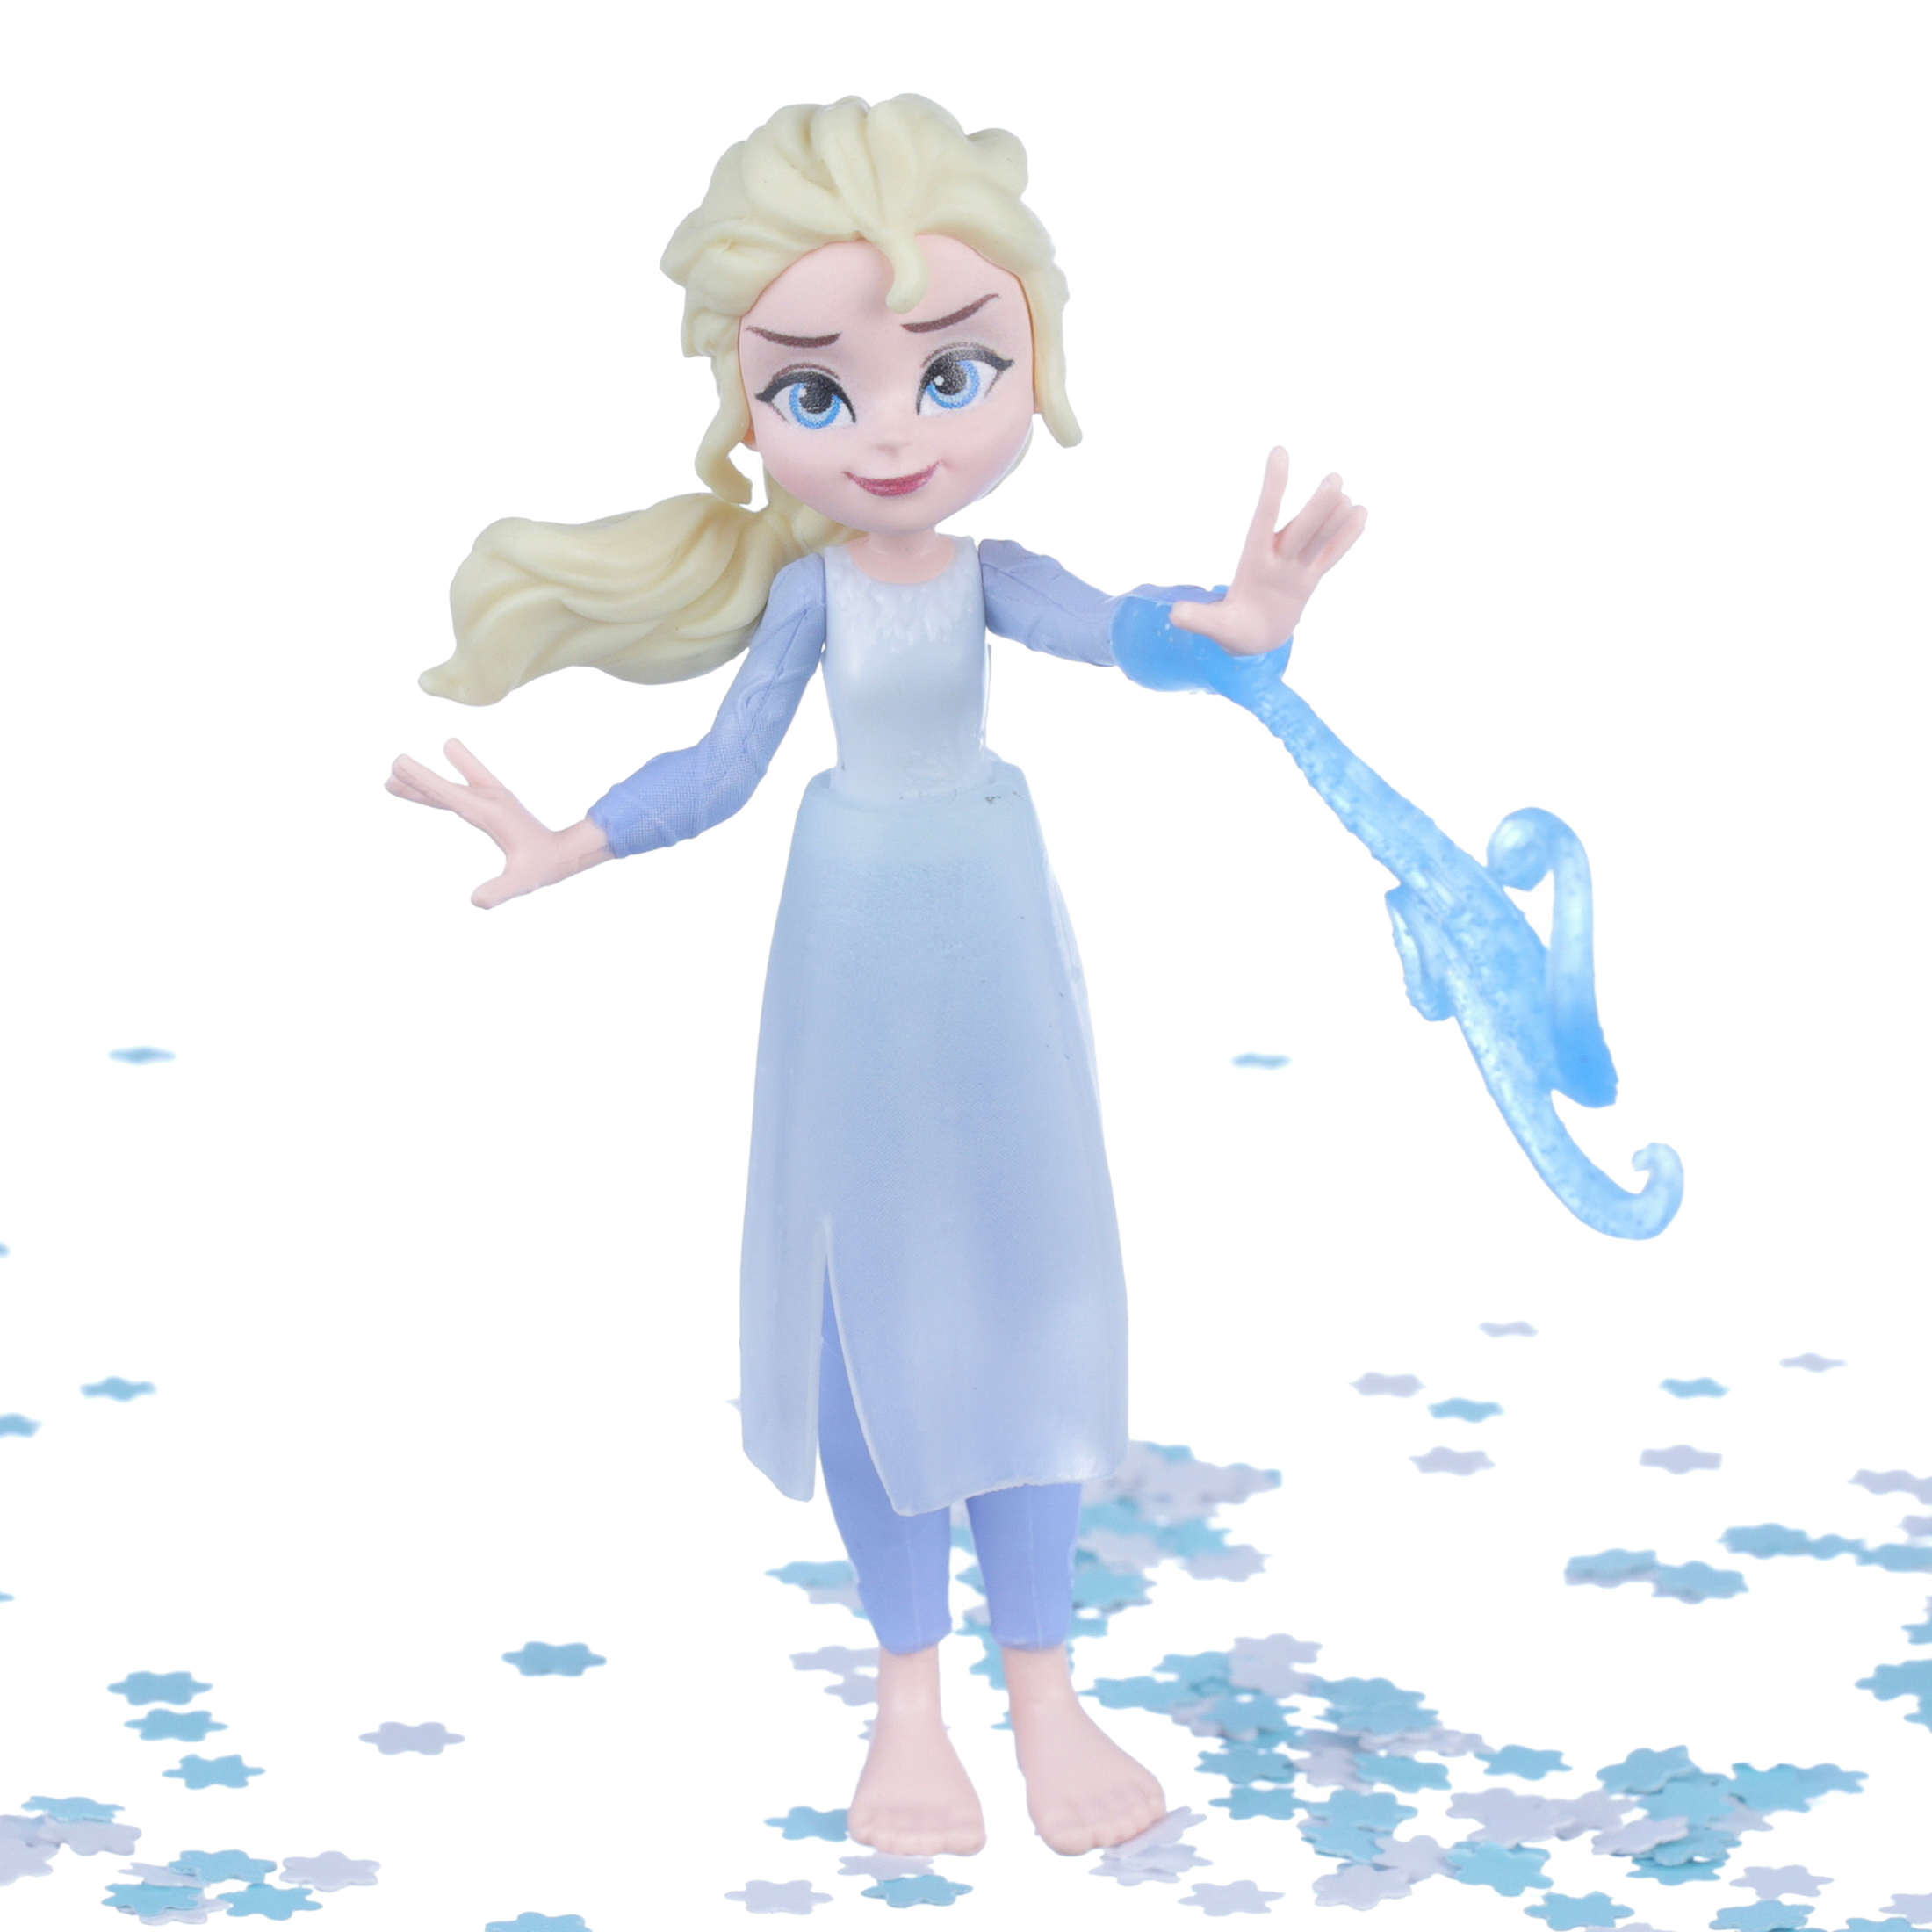 Disney Frozen 2 Elsa and the Nokk Small Doll Playset, Includes Doll and Nokk Figure - image 5 of 8